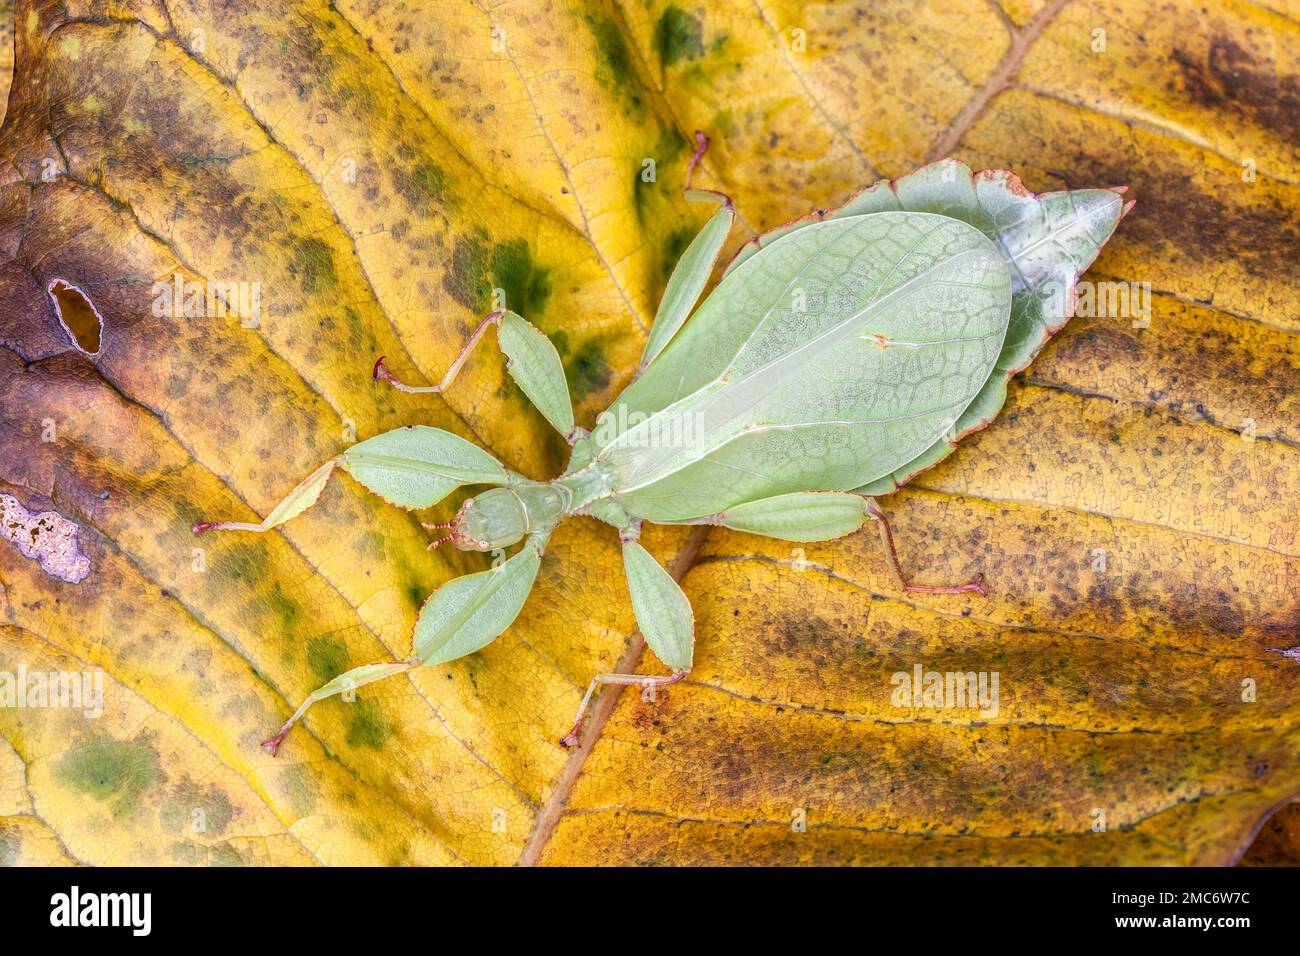 Leaf insect (Phyllium sp.) on leaf. Stock Photo